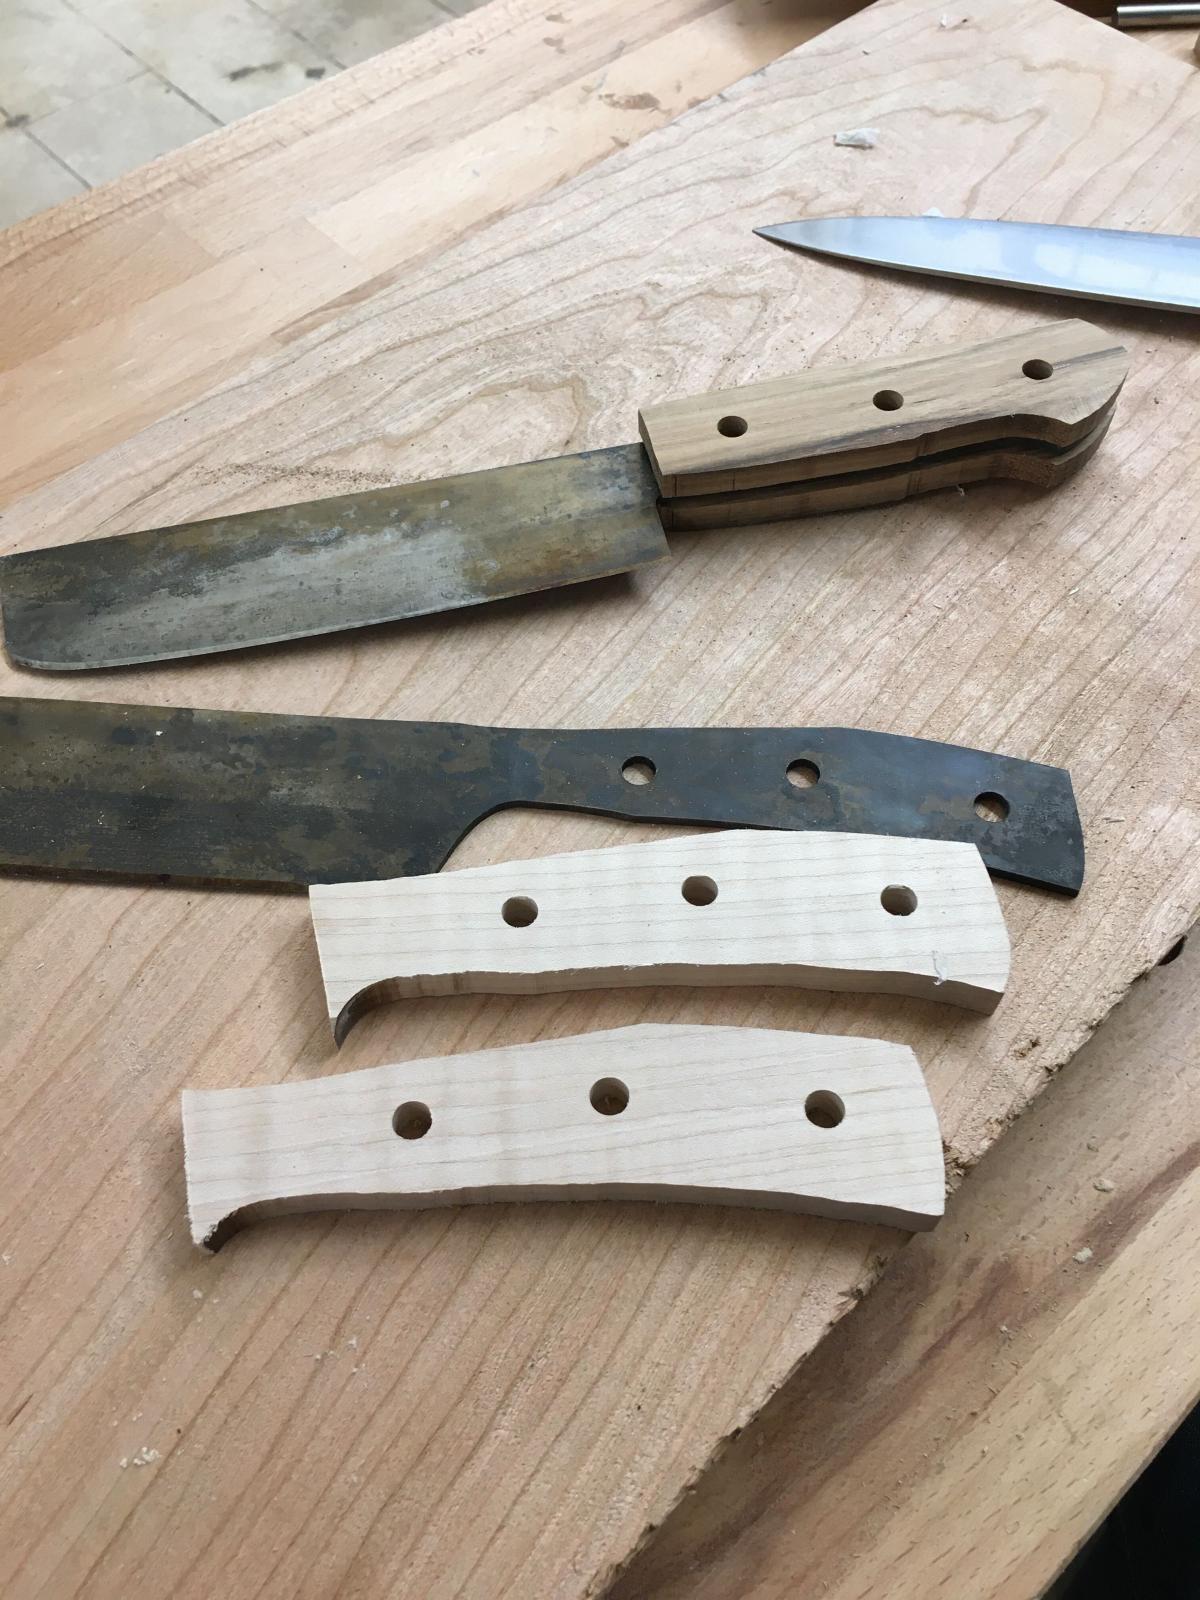 Knife making in progress -- knife parts cut out